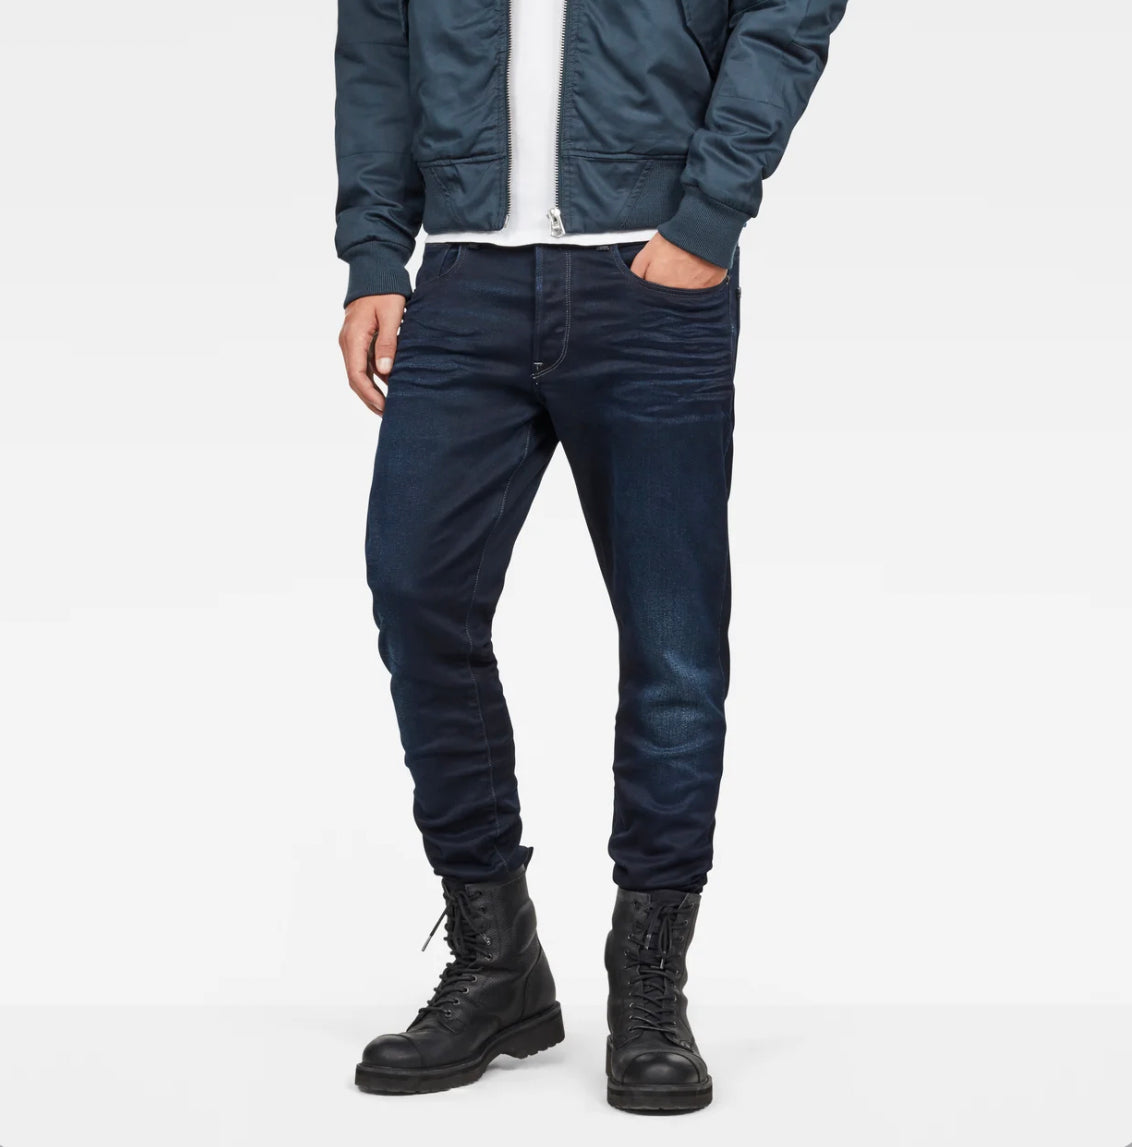 Spille computerspil Narkoman Odds G-Star RAW 3301 STRAIGHT TAPERED Men's - DK AGED – Moesports